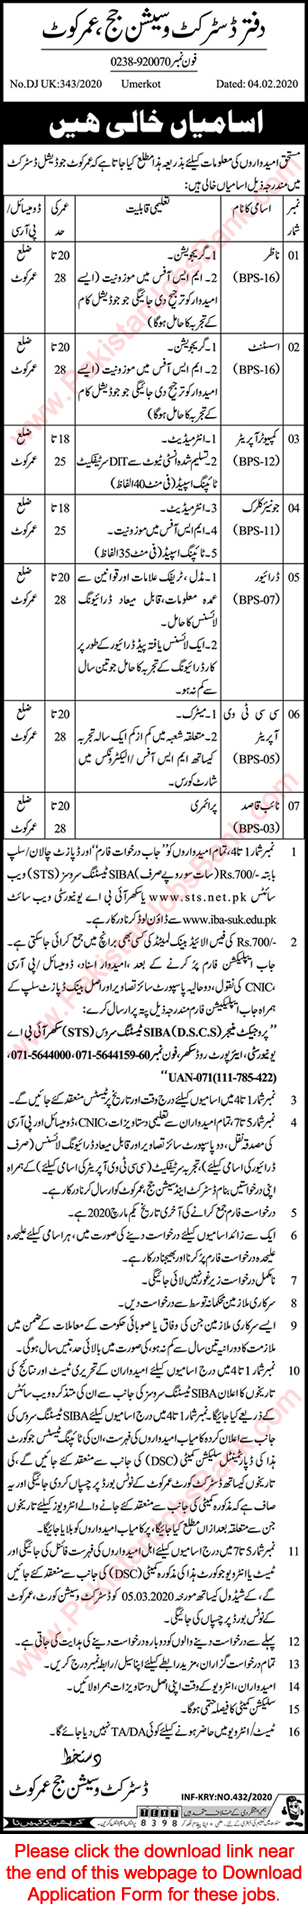 District and Session Court Umerkot Jobs 2020 February Computer Operators, Clerks & Others Latest